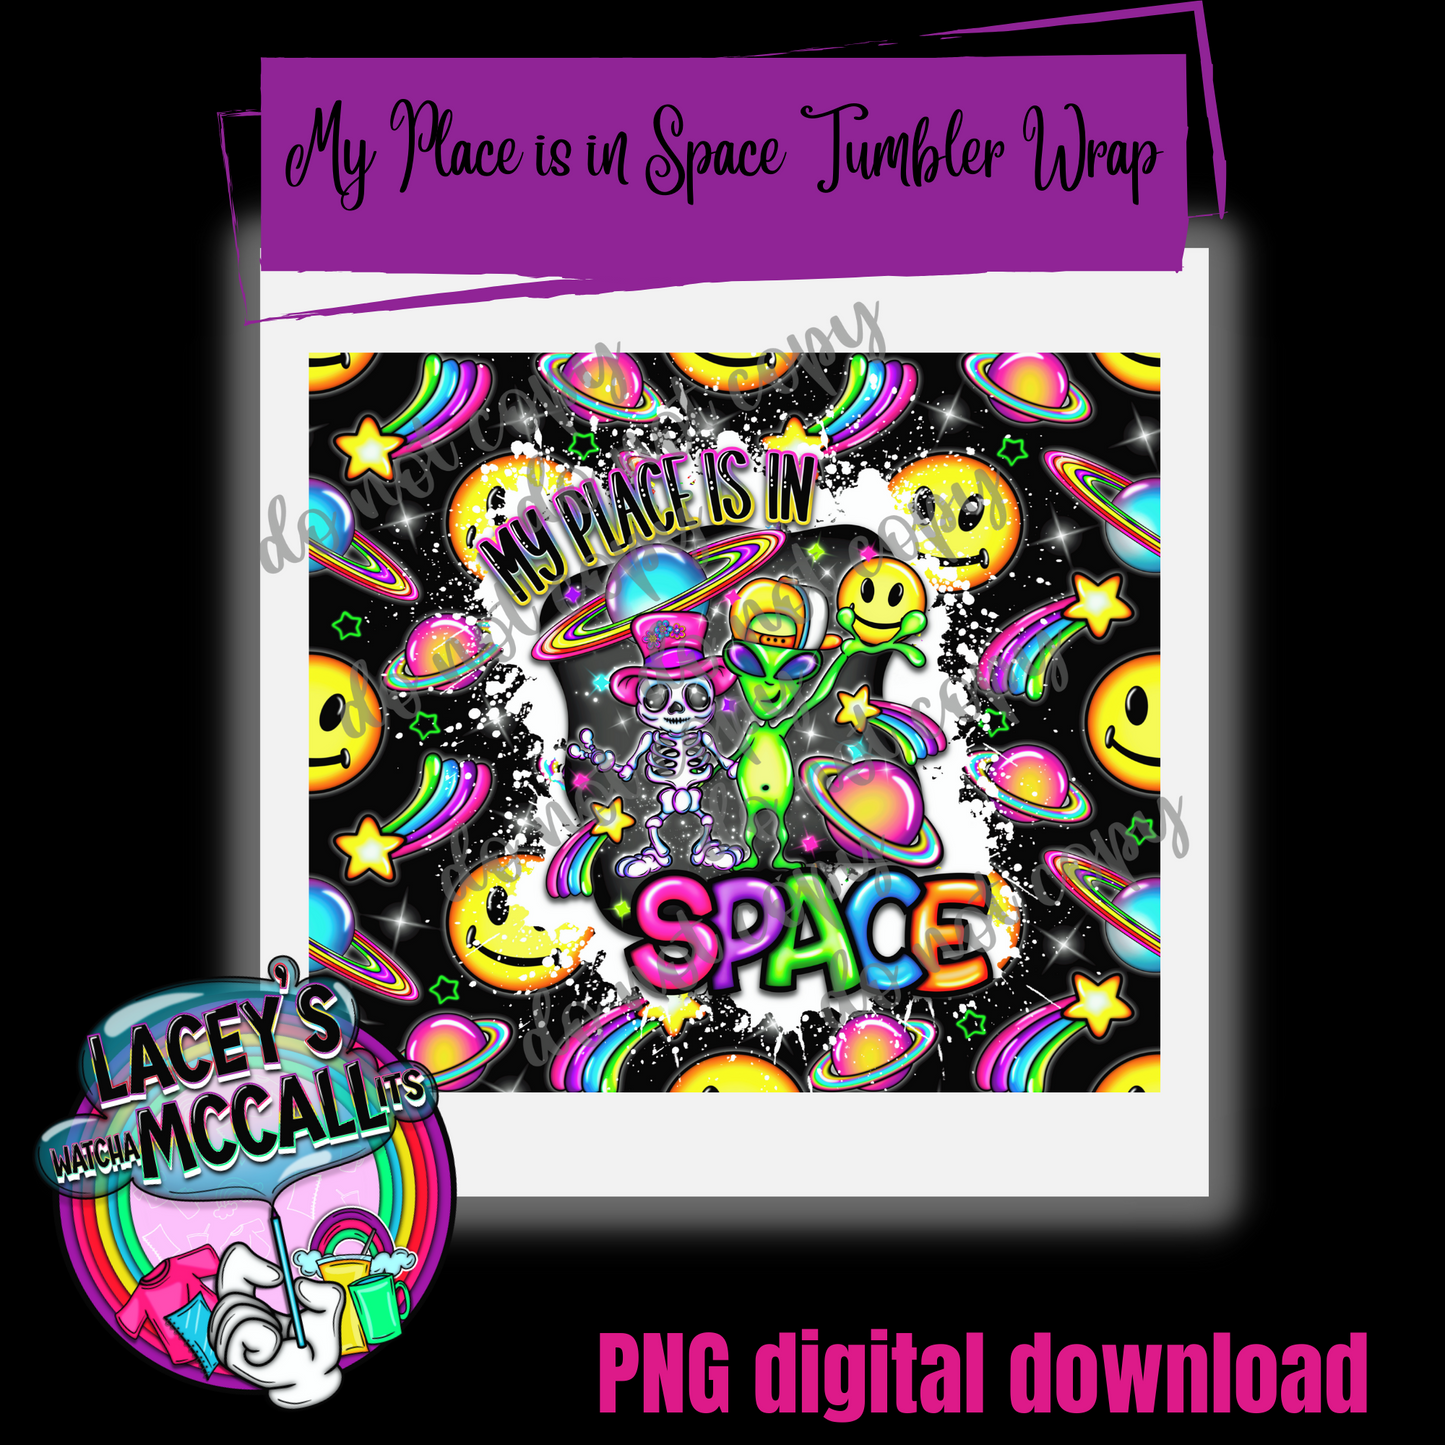 My Place is in Space Tumbler Wrap